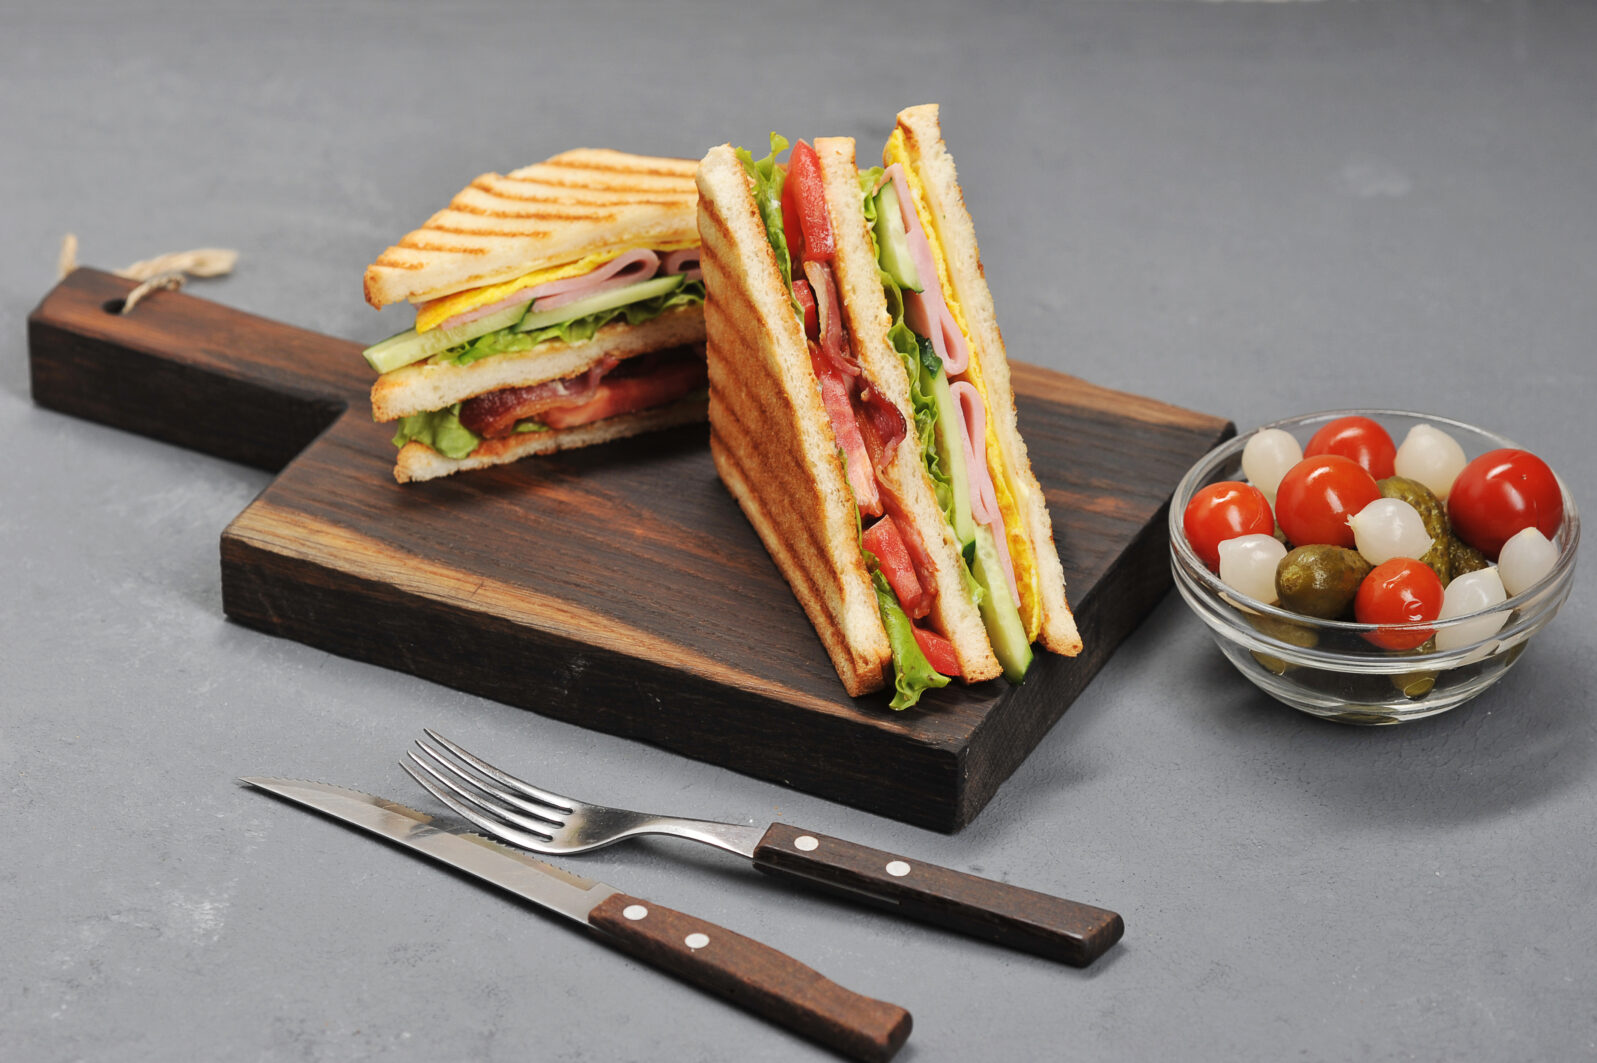 Classic club sandwich with ham and bacon on a wooden board. Next cup is a mixture of pickled miniature onions, gherkins, tomatoes. Gray background. Close-up.